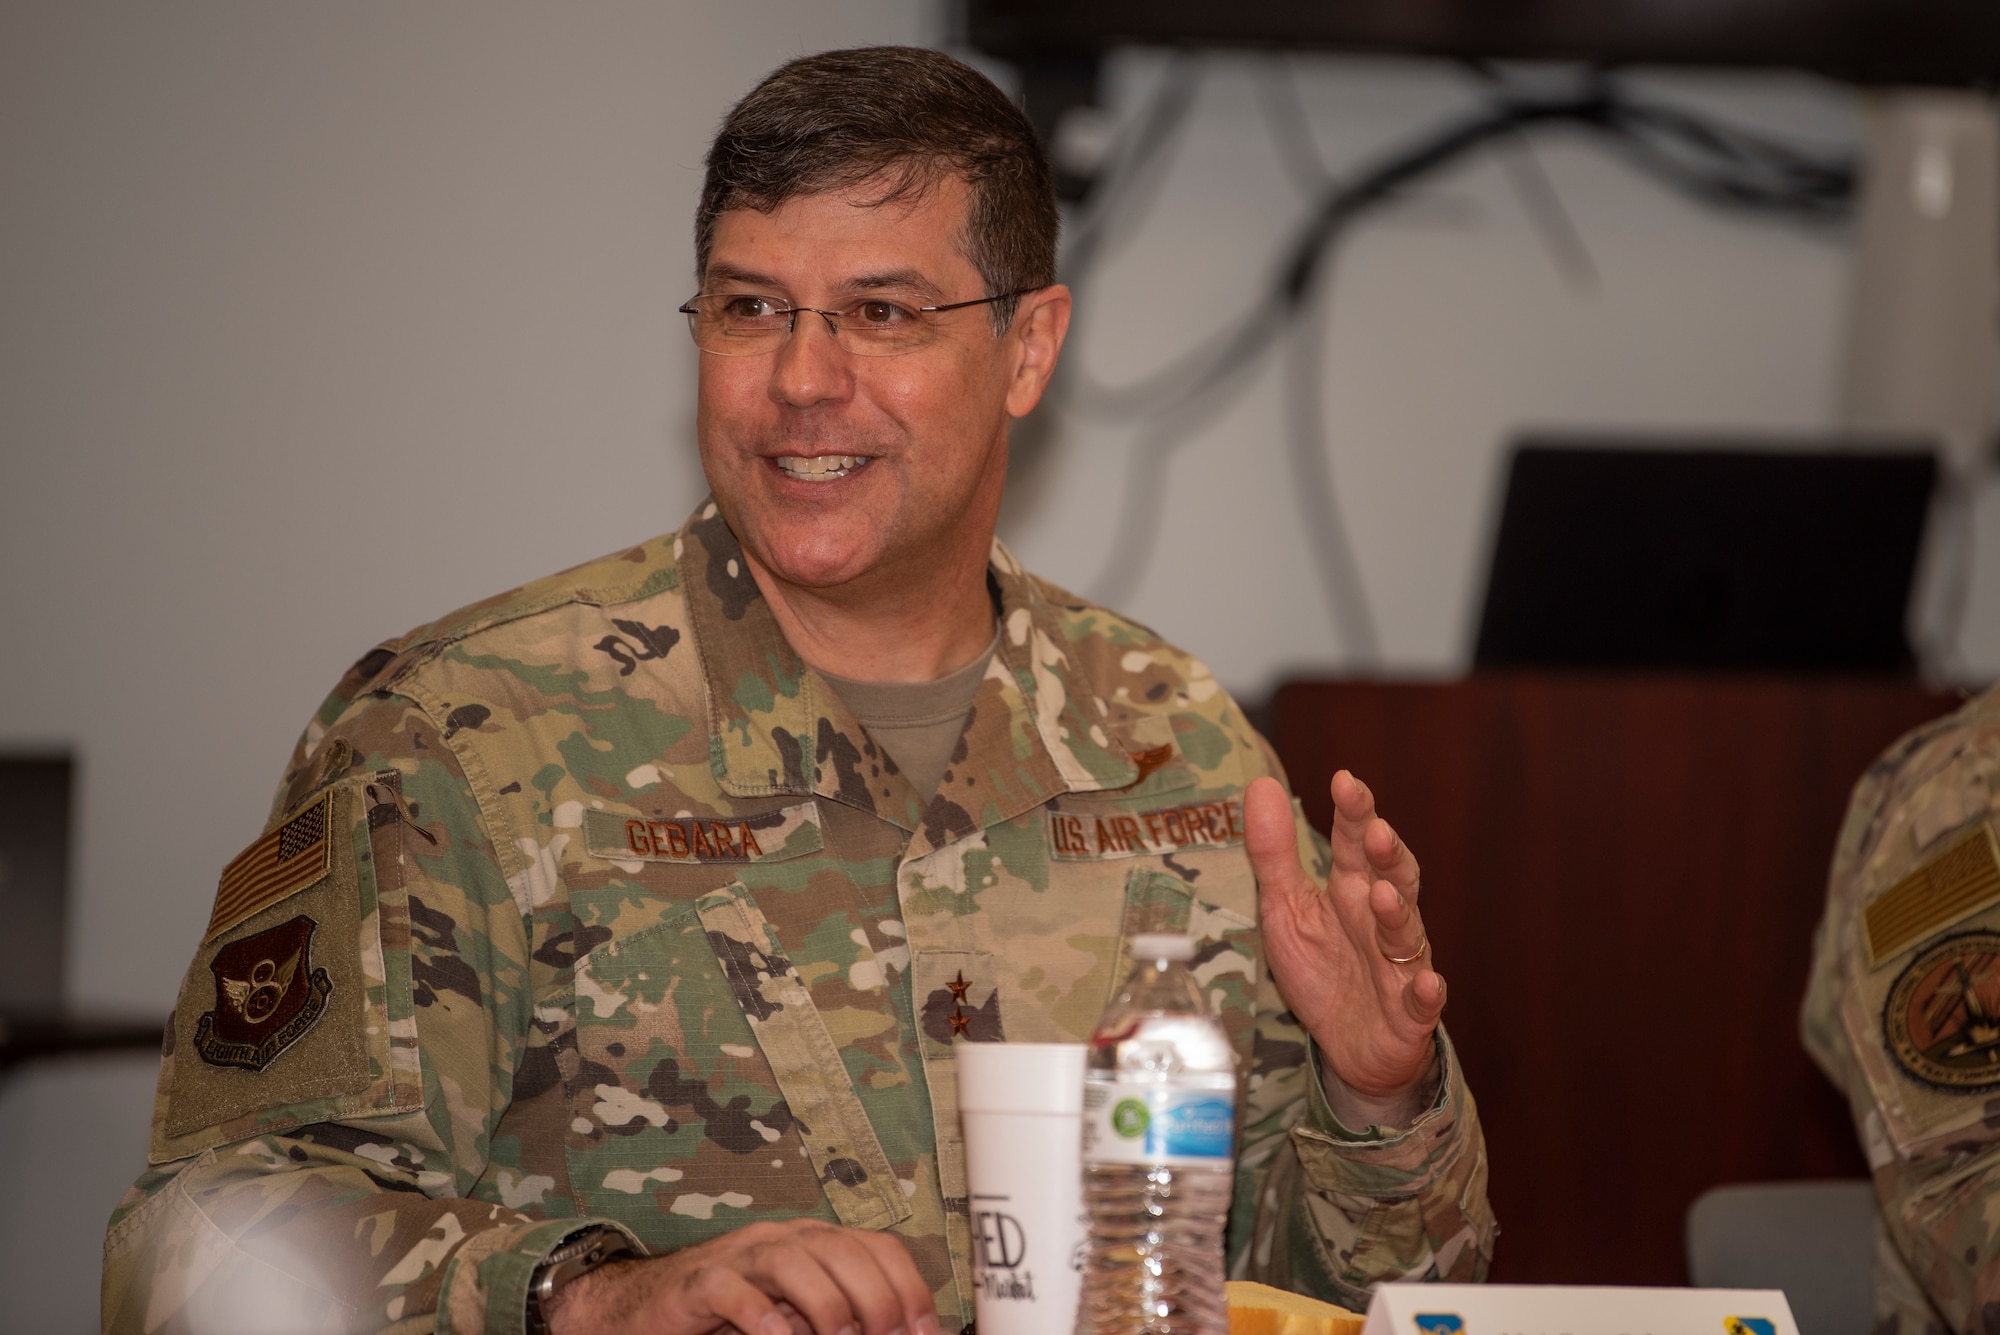 Maj. Gen. Andrew Gebara, 8th Air Force and Joint-Global Strike Operations Center commander, speaks to a group of Company Grade Officers during a luncheon at Dyess Air Force Base, Texas, Jan. 6, 2023. The General took the opportunity to get to know the CGO’s of Dyess on a more personal and professional level. (U.S. Air Force photo by Airman 1st Class Ryan Hayman)